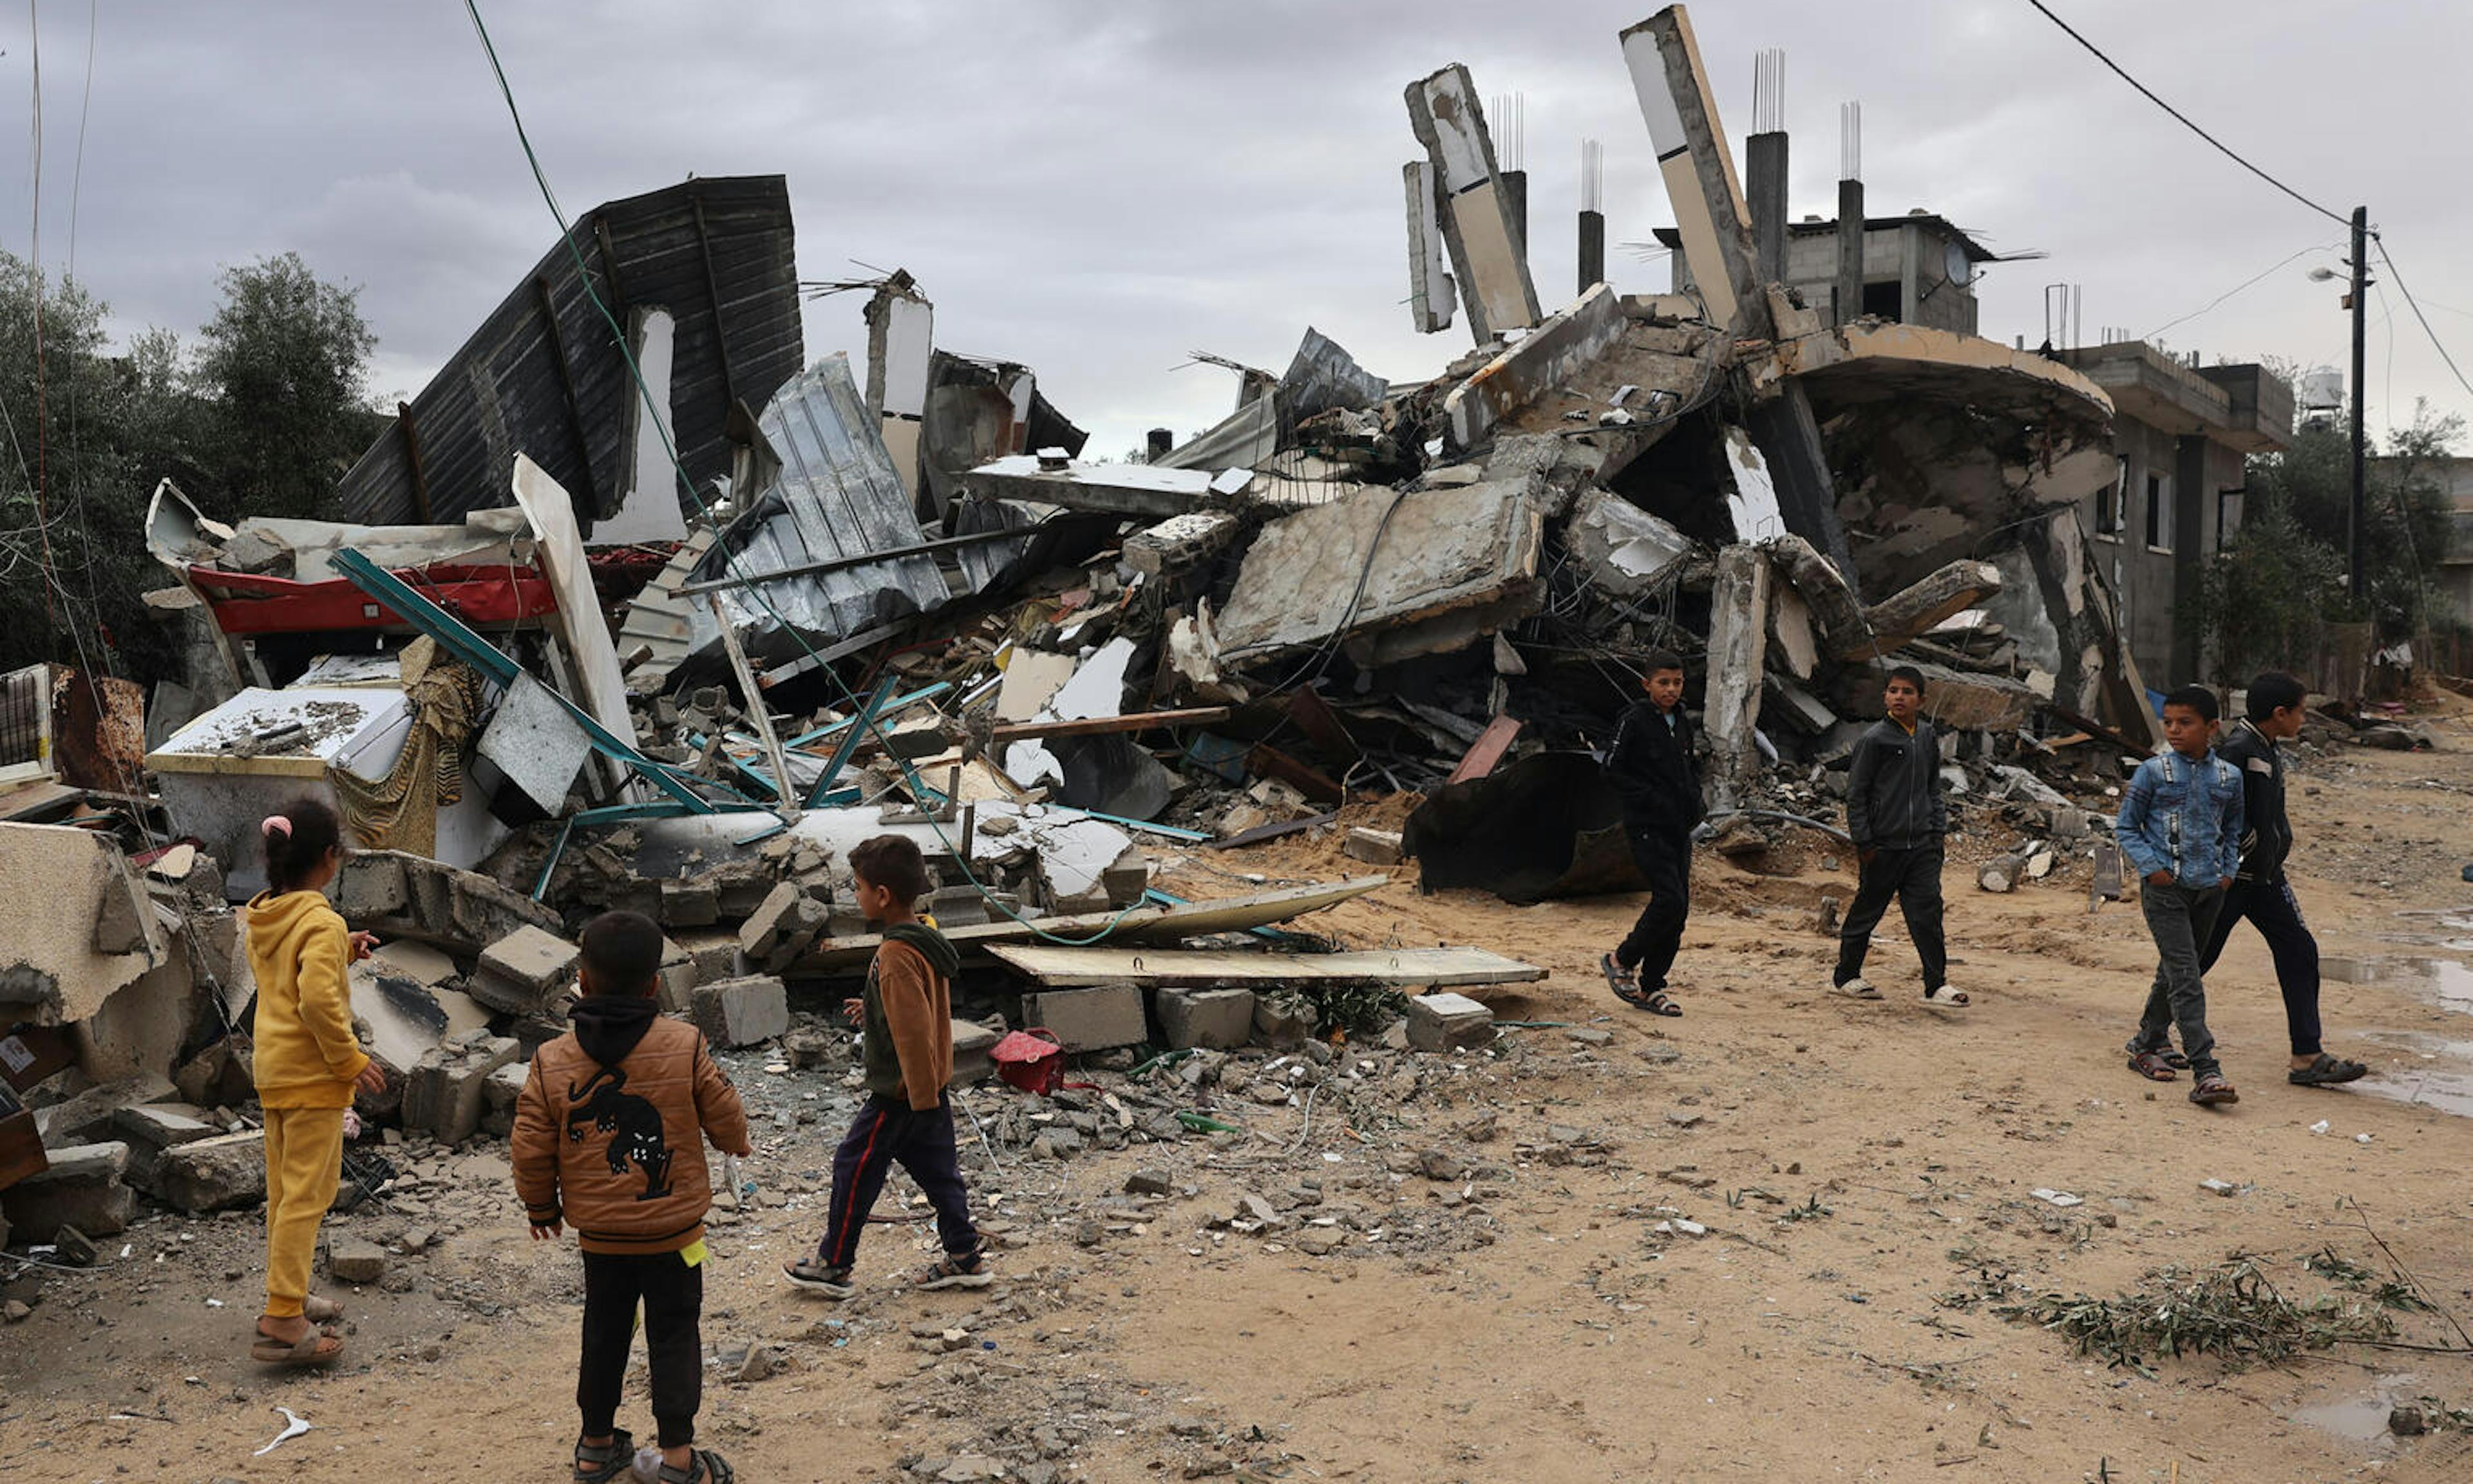 children in Gaza congregating in front of rubble